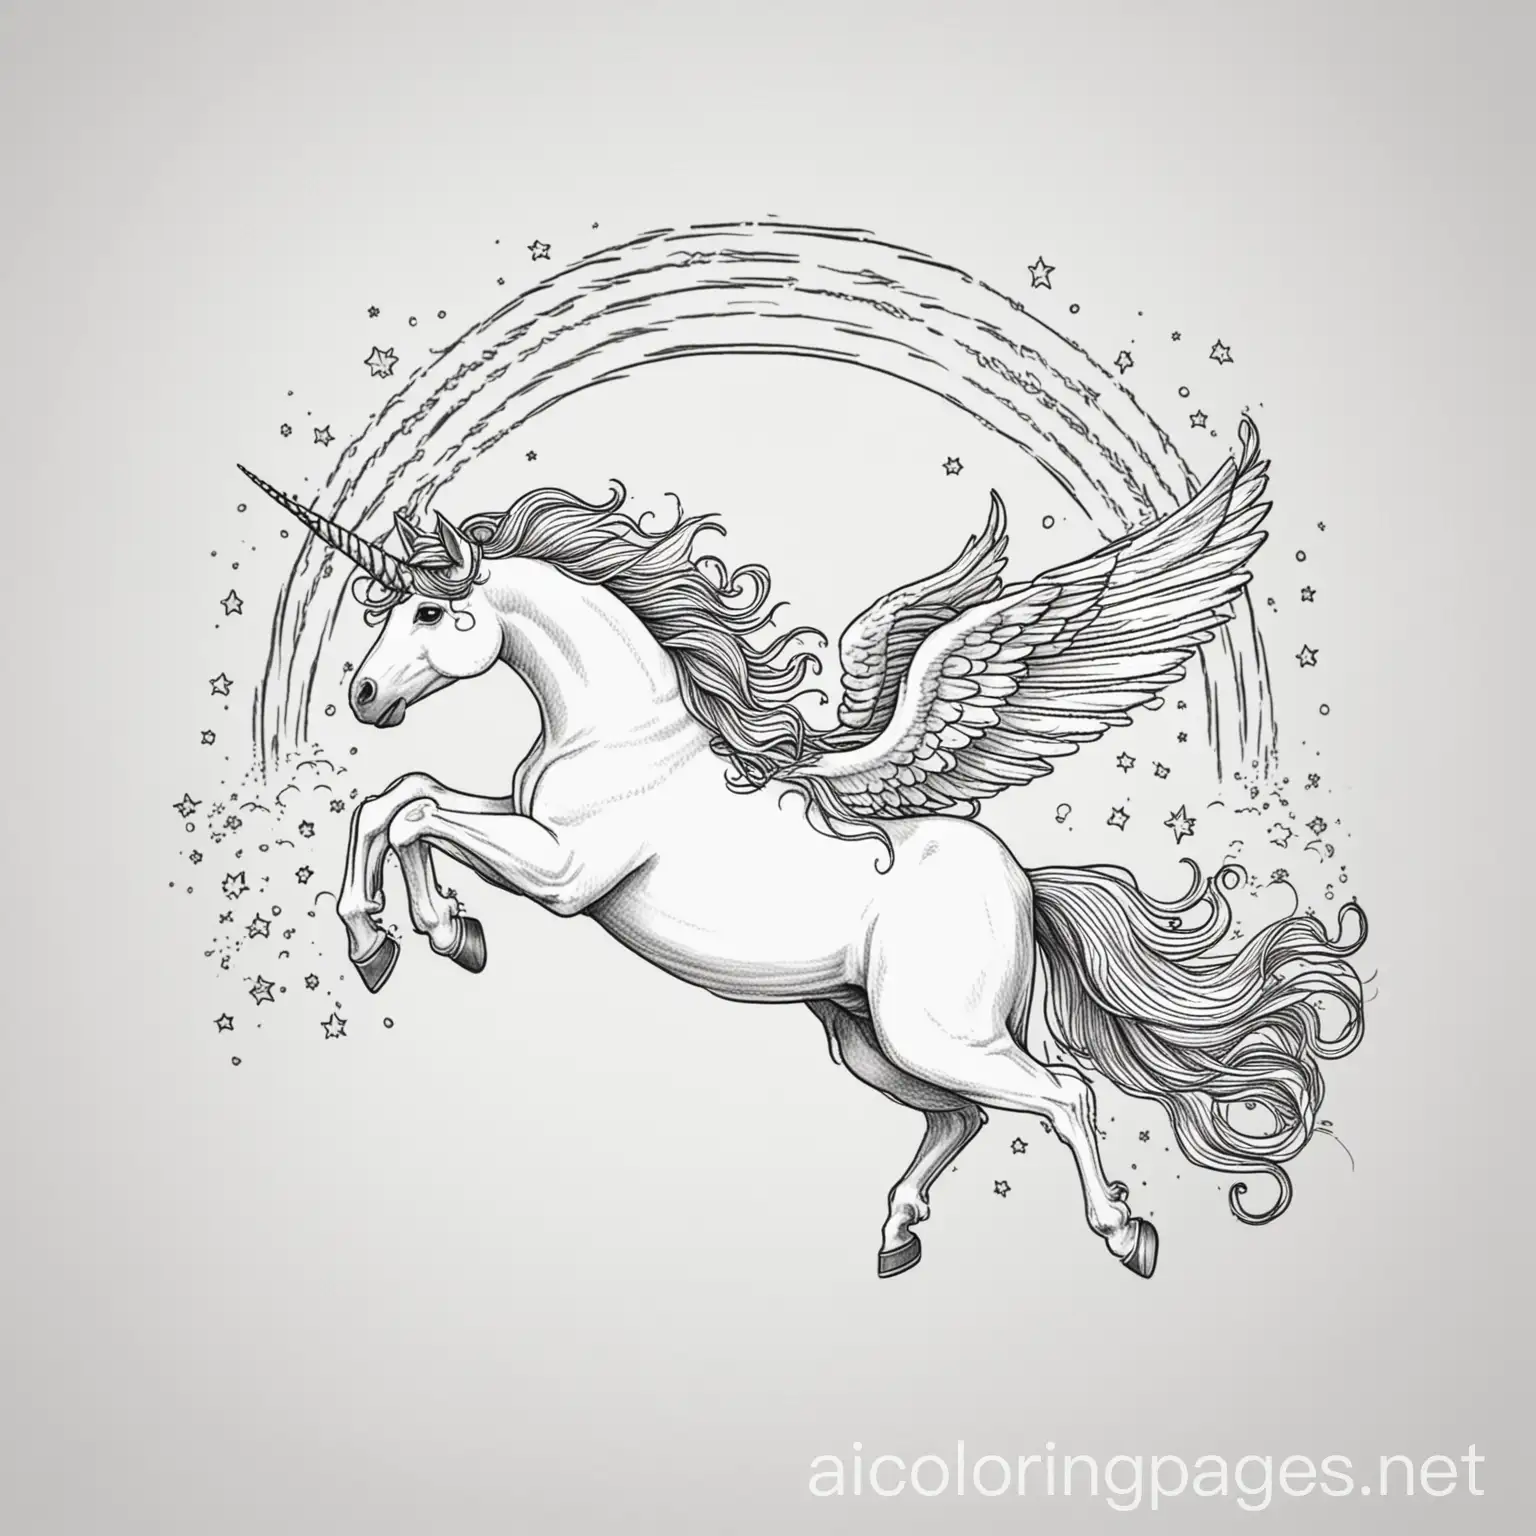 unicorn flying over a rainbow, Coloring Page, black and white, line art, white background, Simplicity, Ample White Space. The background of the coloring page is plain white to make it easy for young children to color within the lines. The outlines of all the subjects are easy to distinguish, making it simple for kids to color without too much difficulty